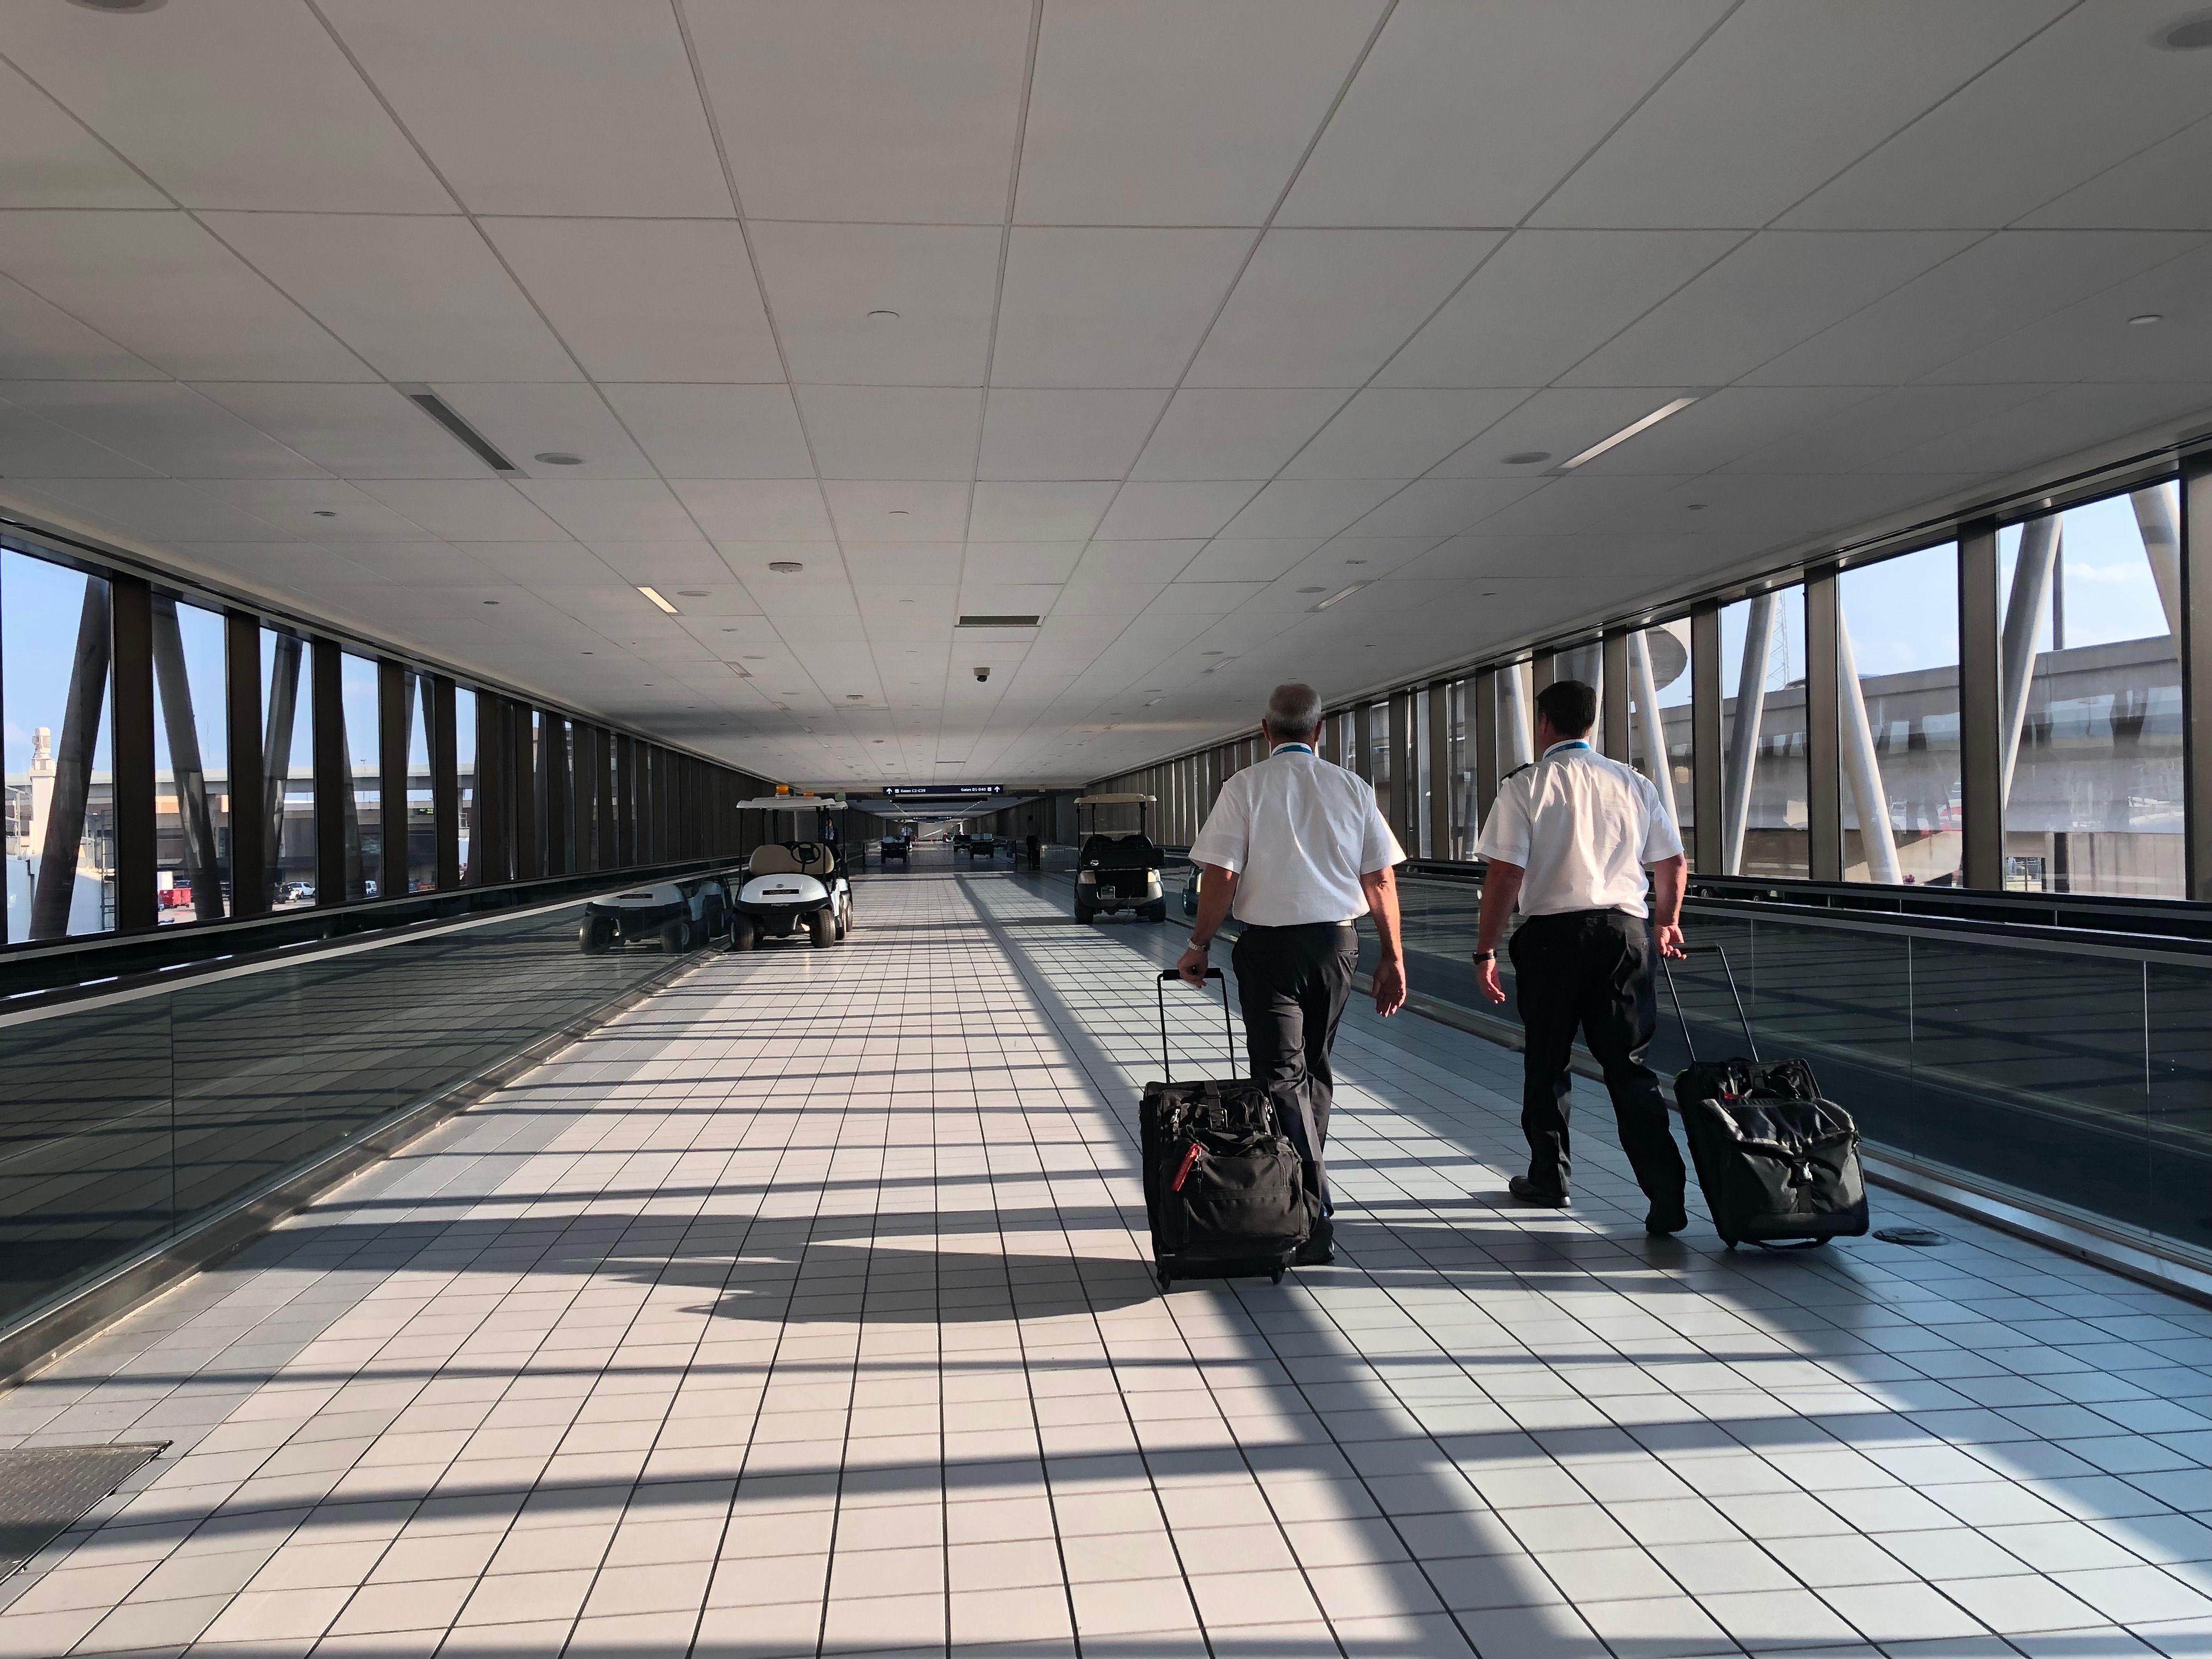 Pilots walking through the terminal connector at DFW airport. 